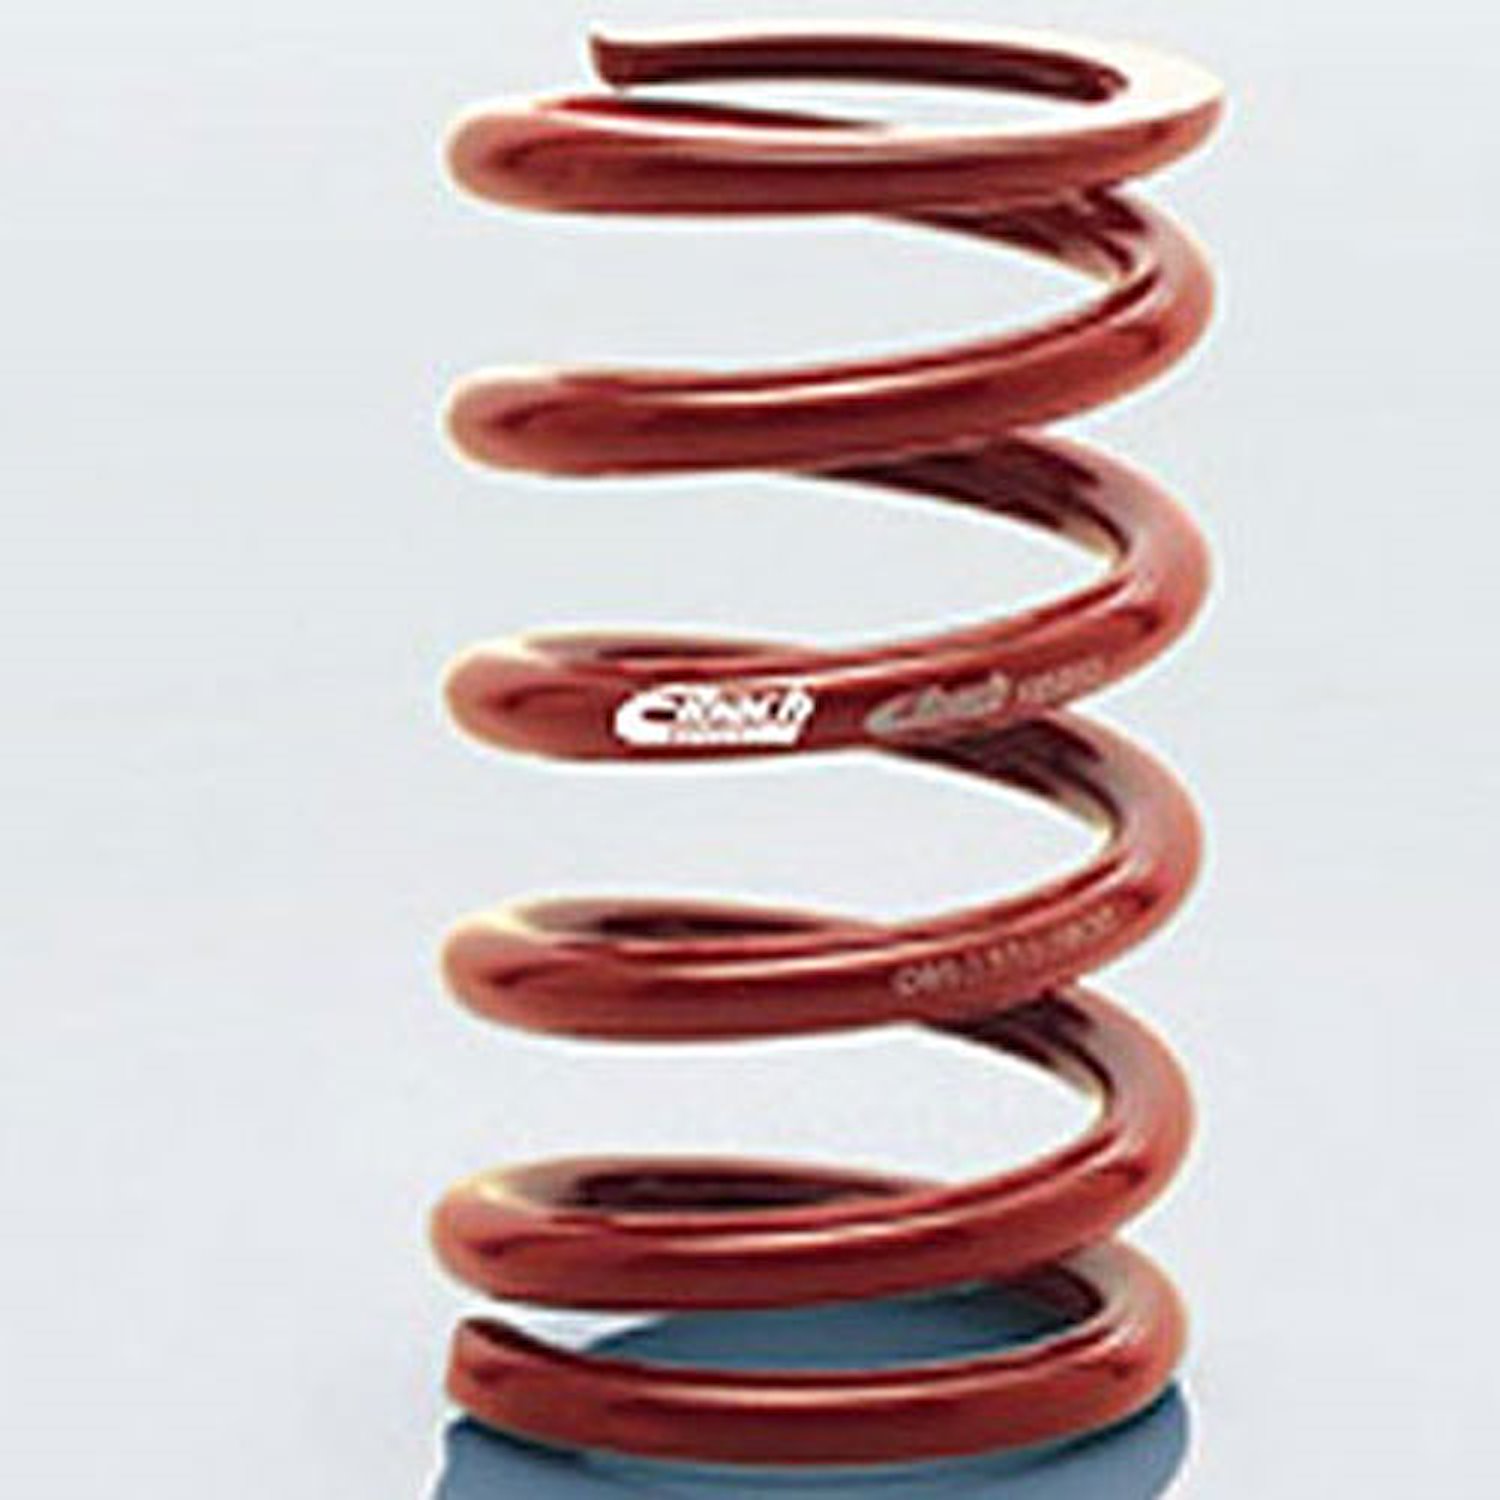 0950.550.0400 EIBACH CONVENTIONAL FRONT SPRING